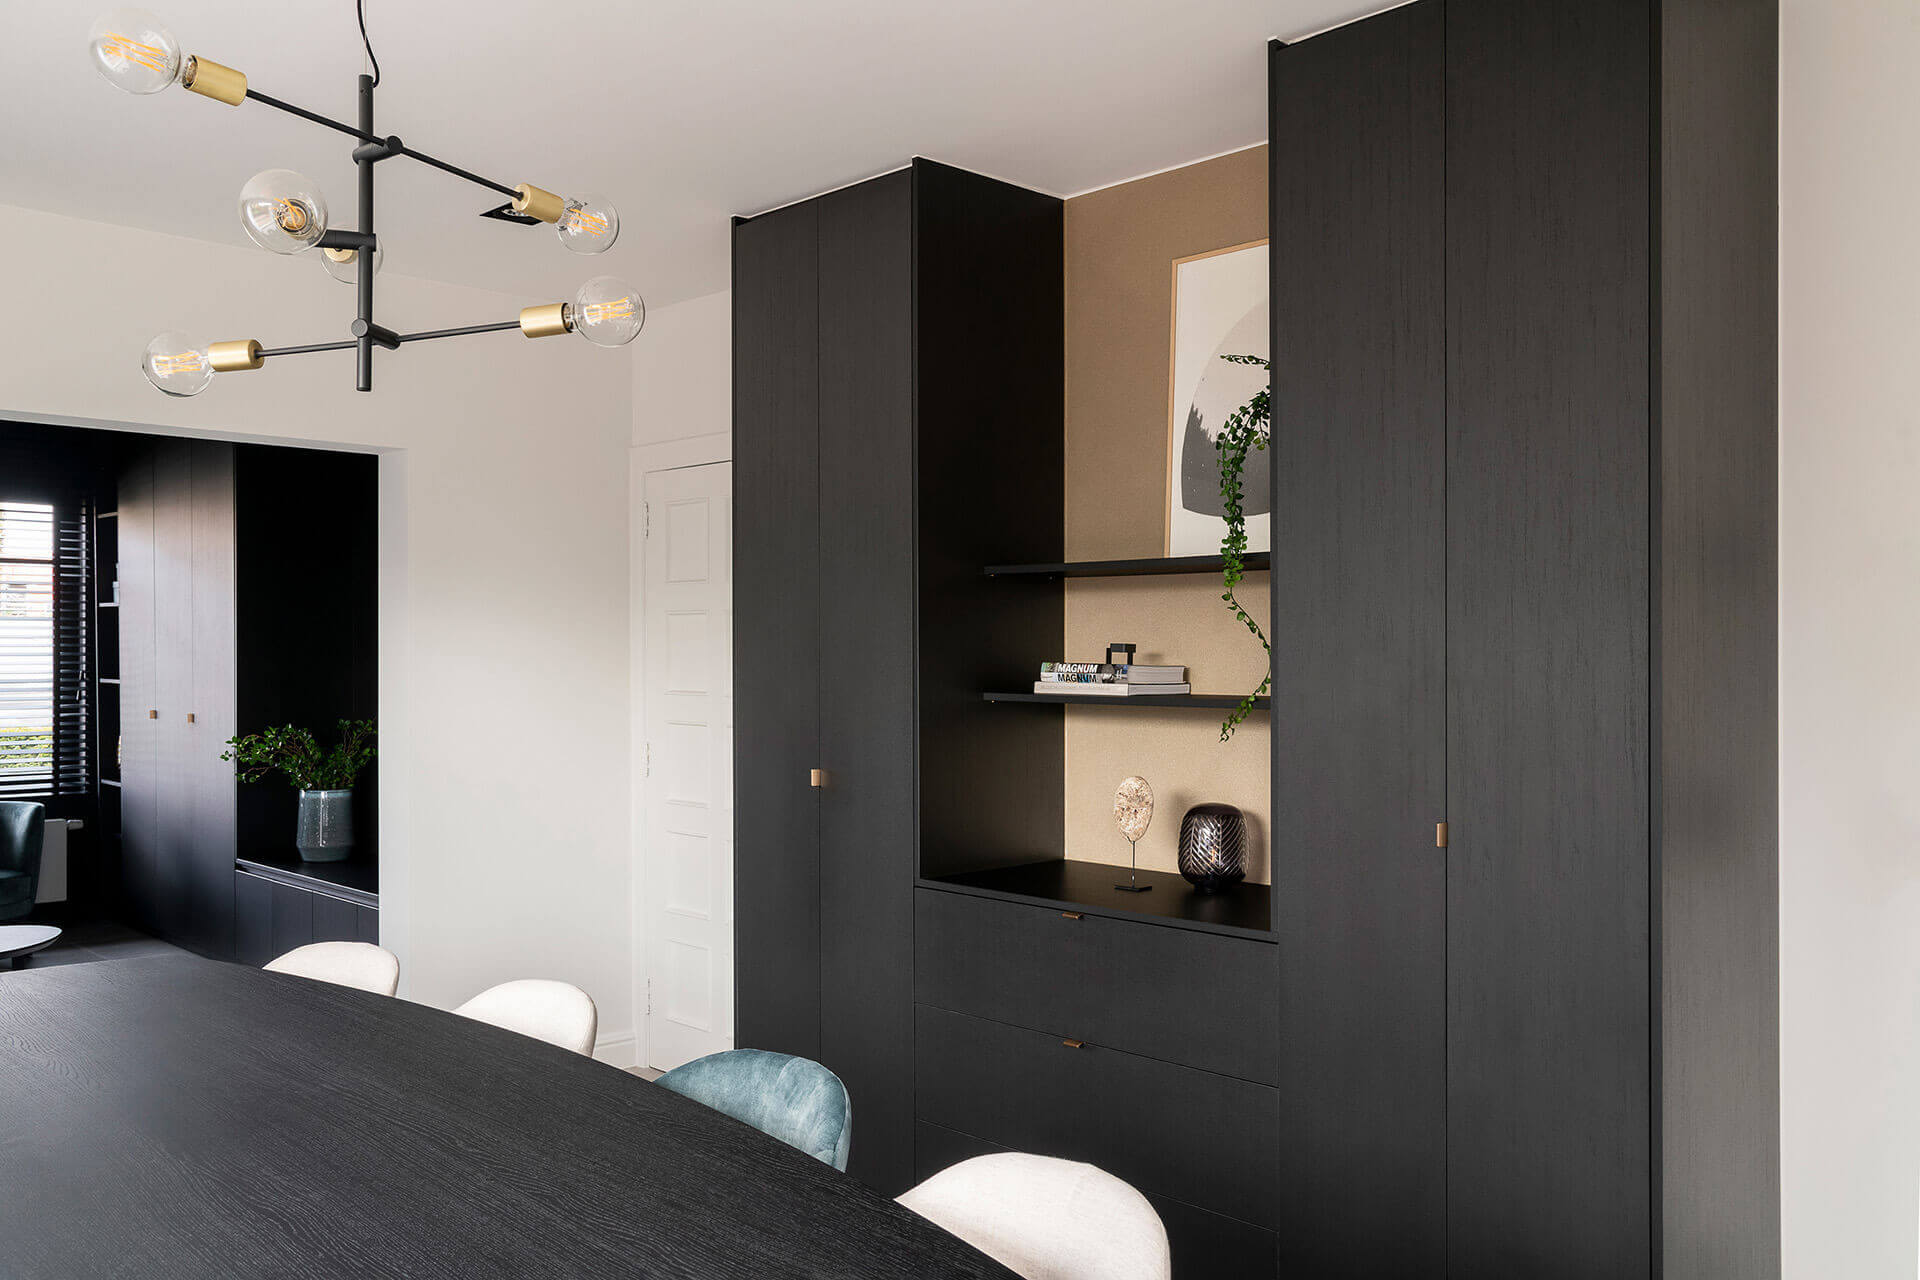 Wall unit combination, consisting of 2 tall storage cabinets and a chest of drawers in the middle